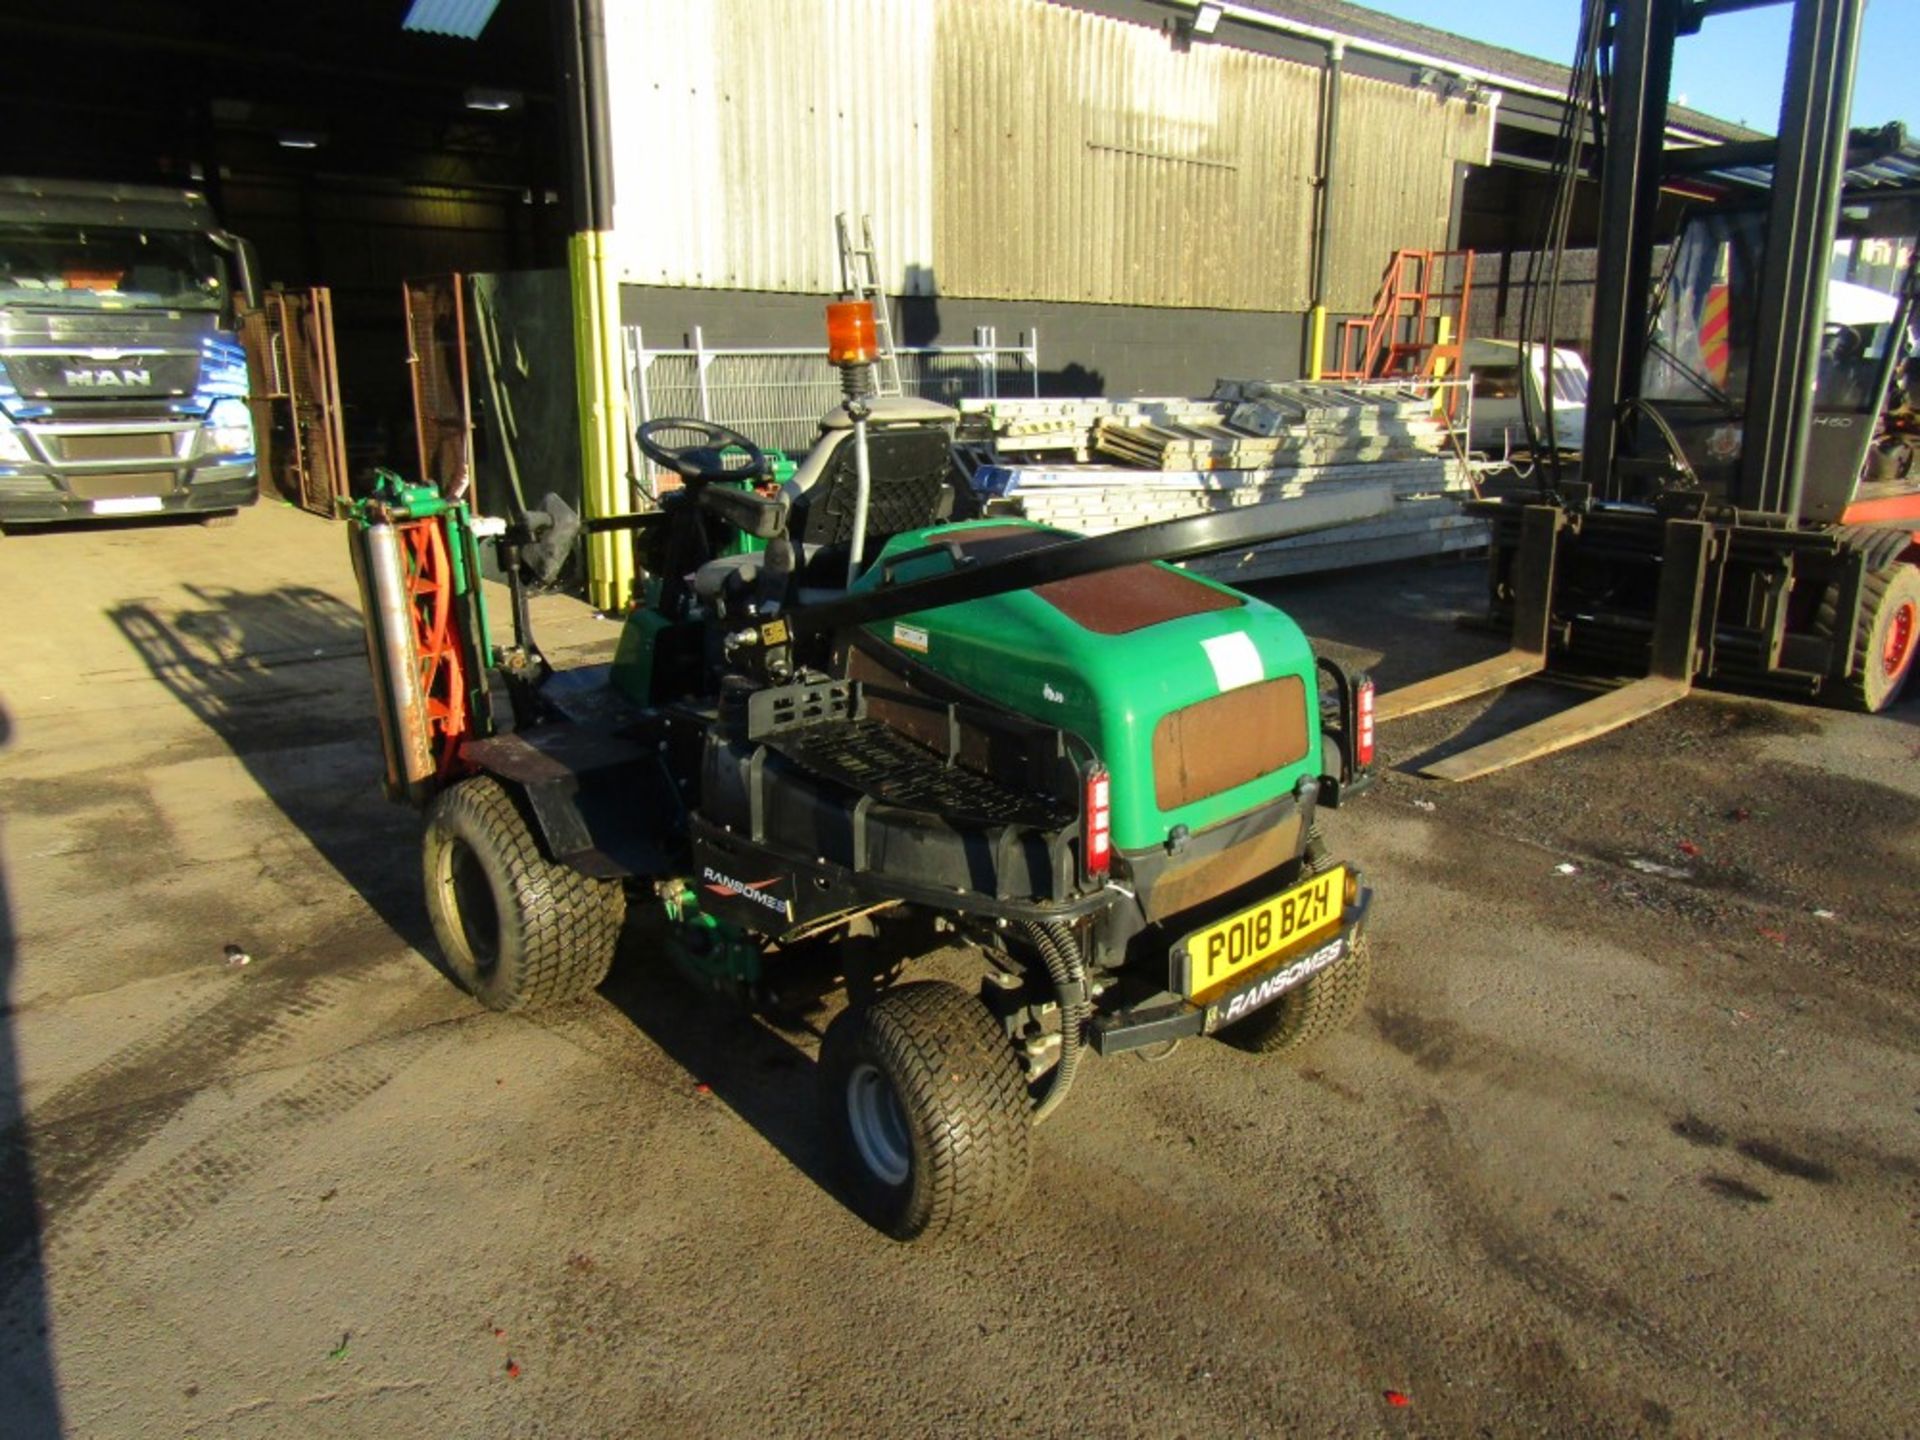 18 reg RANSOMES PARKWAY 3 TRIPLE RIDE ON MOWER (DIRECT COUNCIL) 1ST REG 05/18, 224 HOURS - Image 3 of 6